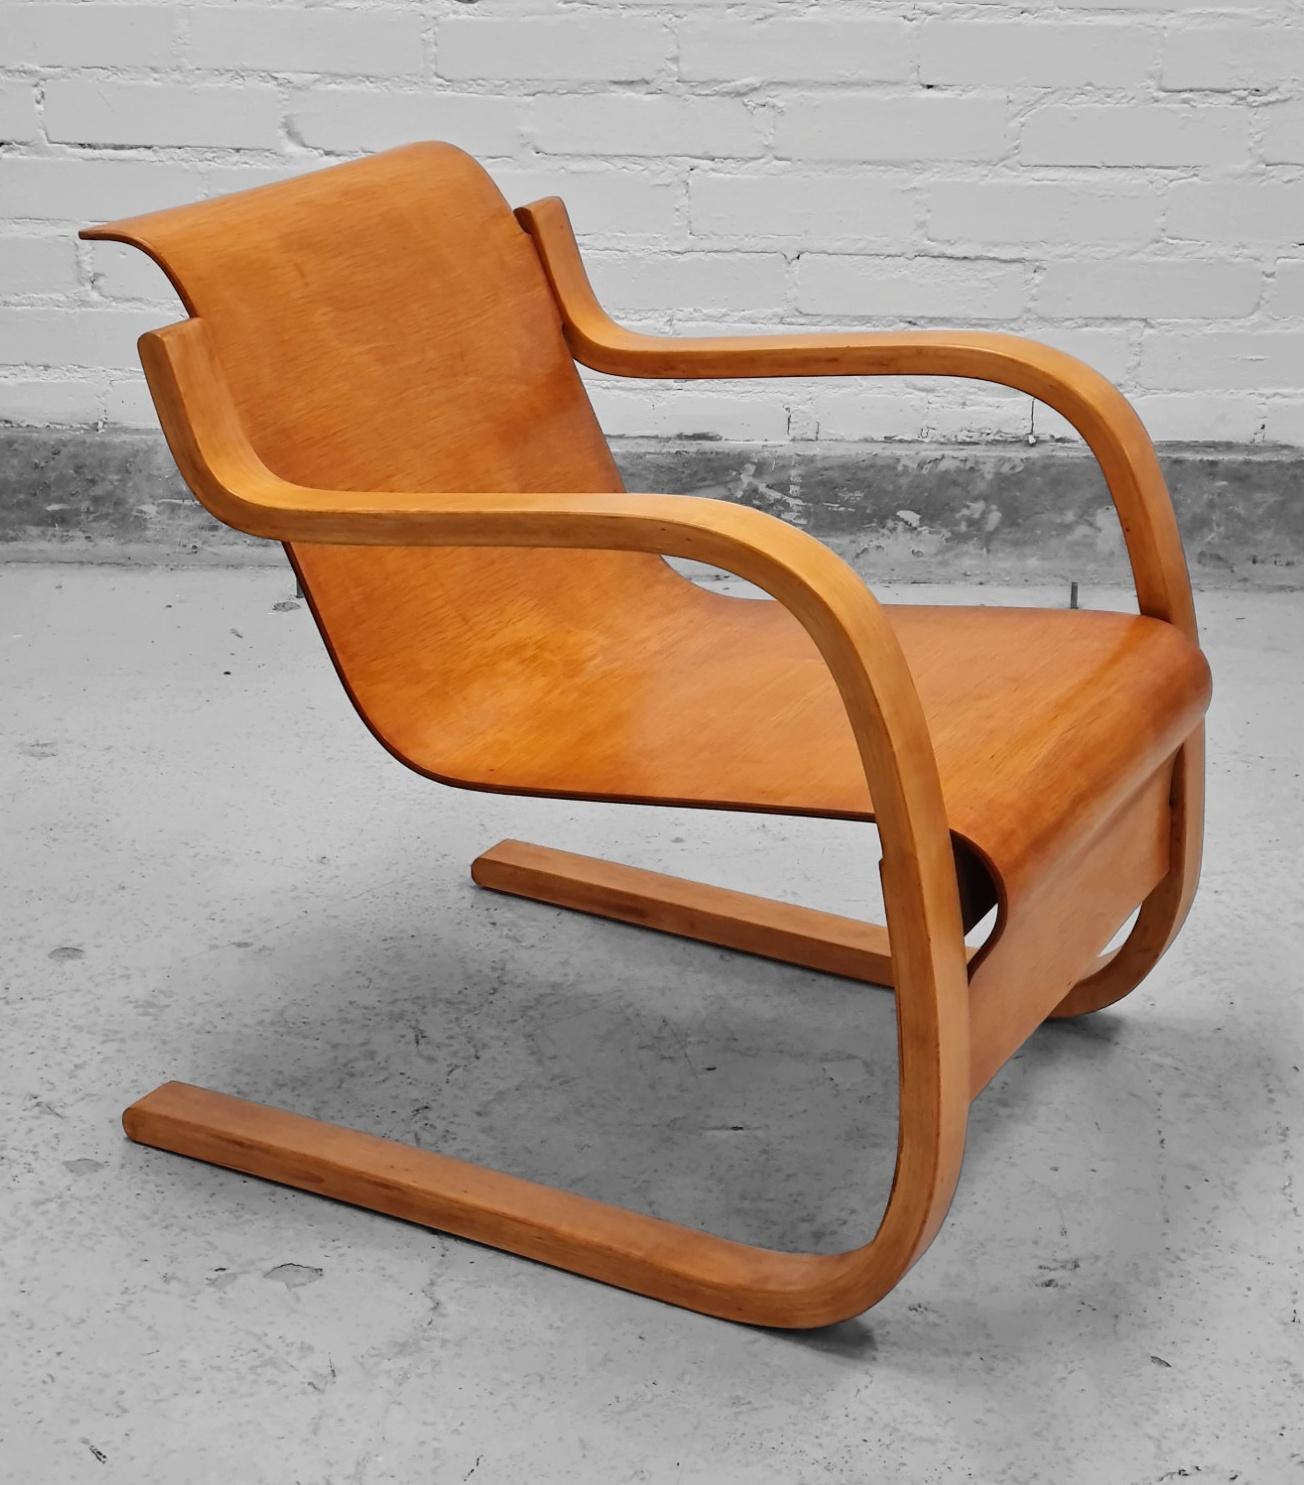 One of the most iconic and finest furniture works from Alvar Aalto, the model 42 chair, also known as  spring chair, `Pikku Paimio` or Small Paimio in english. It is regarded as an iconic masterpiece of design. This model was originally created in